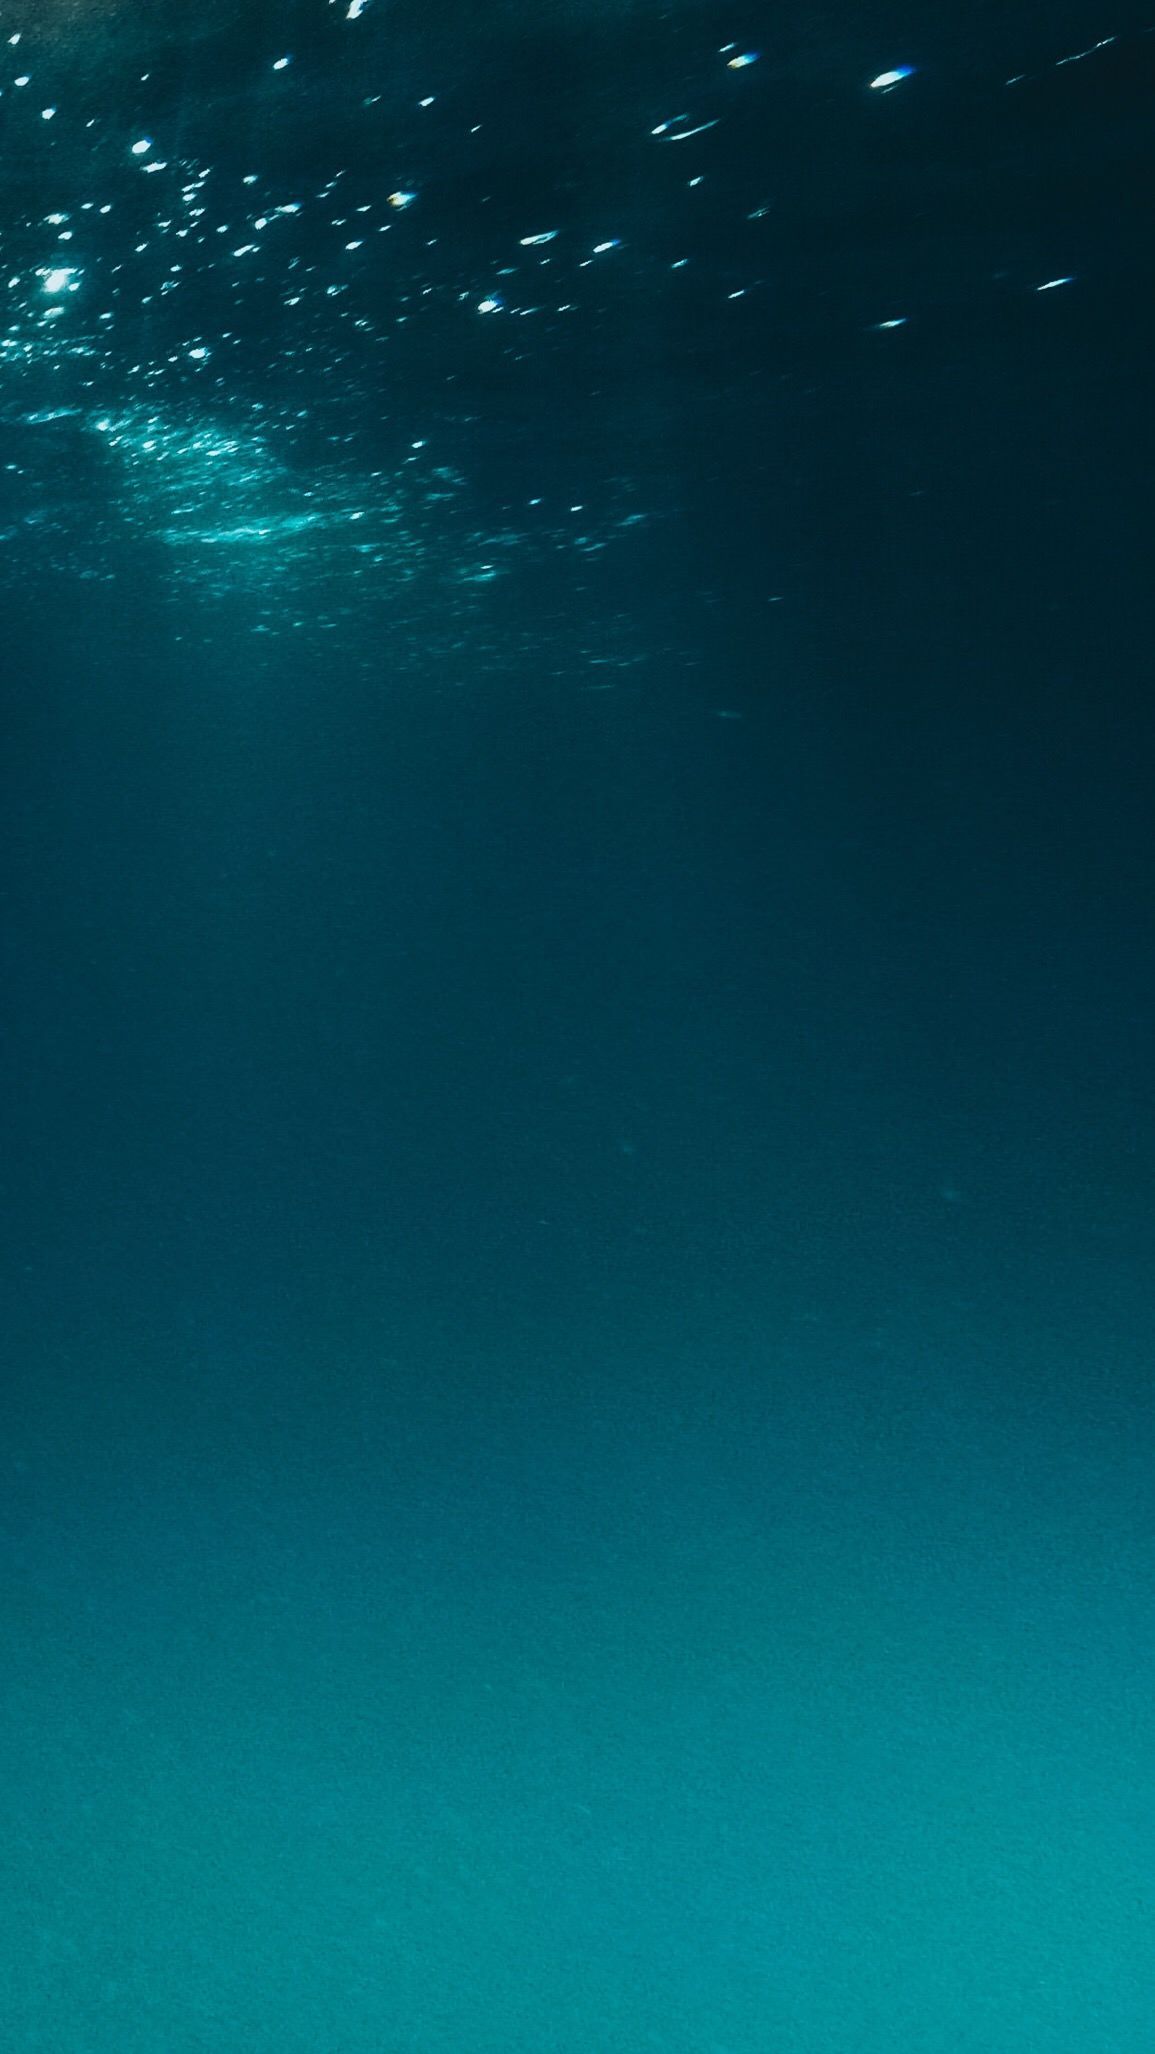 A dark blue and turquoise underwater scene with light shining through the water. - Underwater